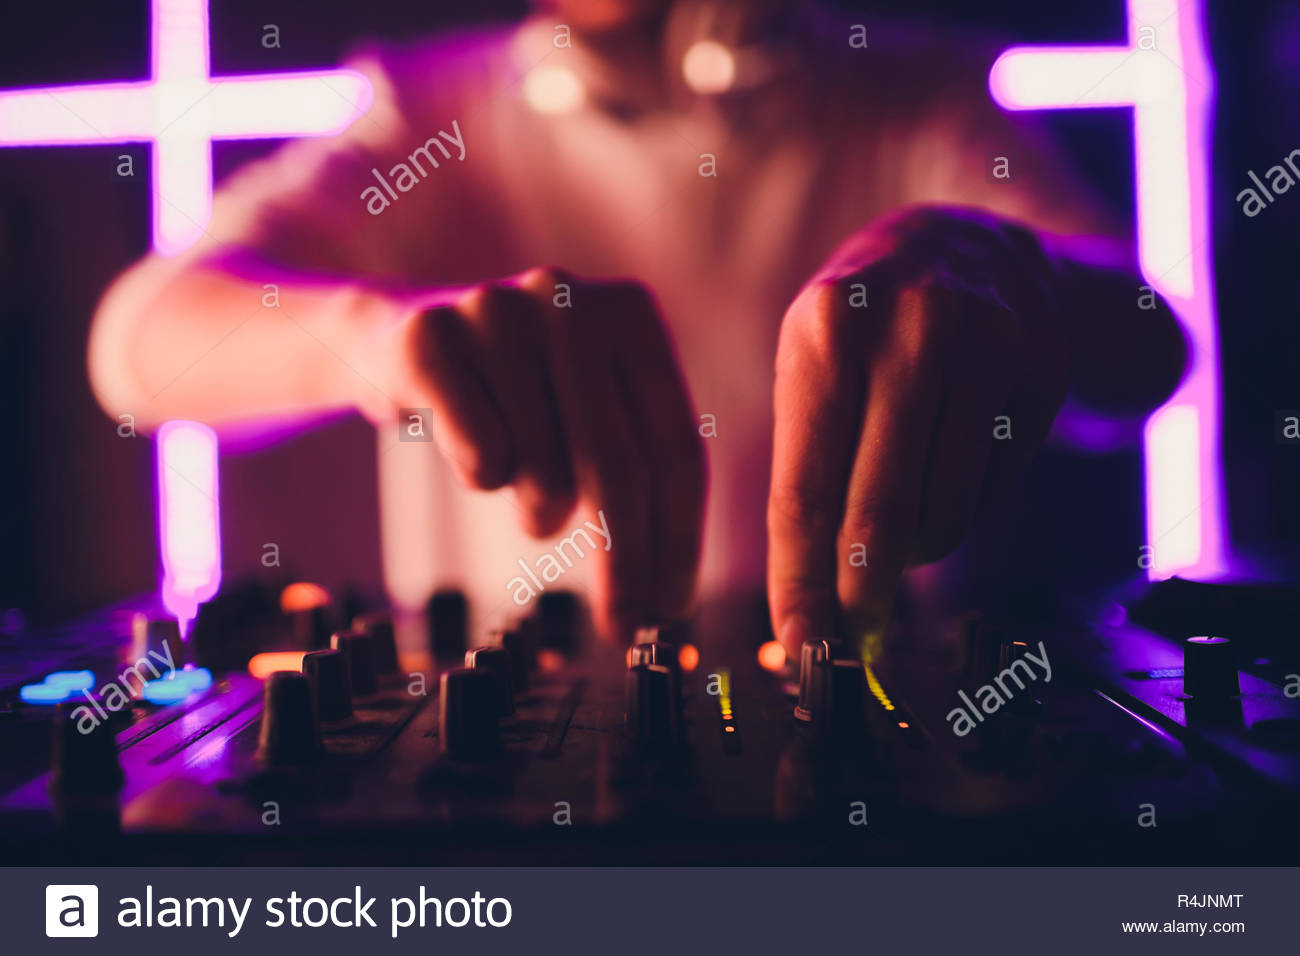 Dj Playing Music At Mixer On Colorful Blurred Background Stock